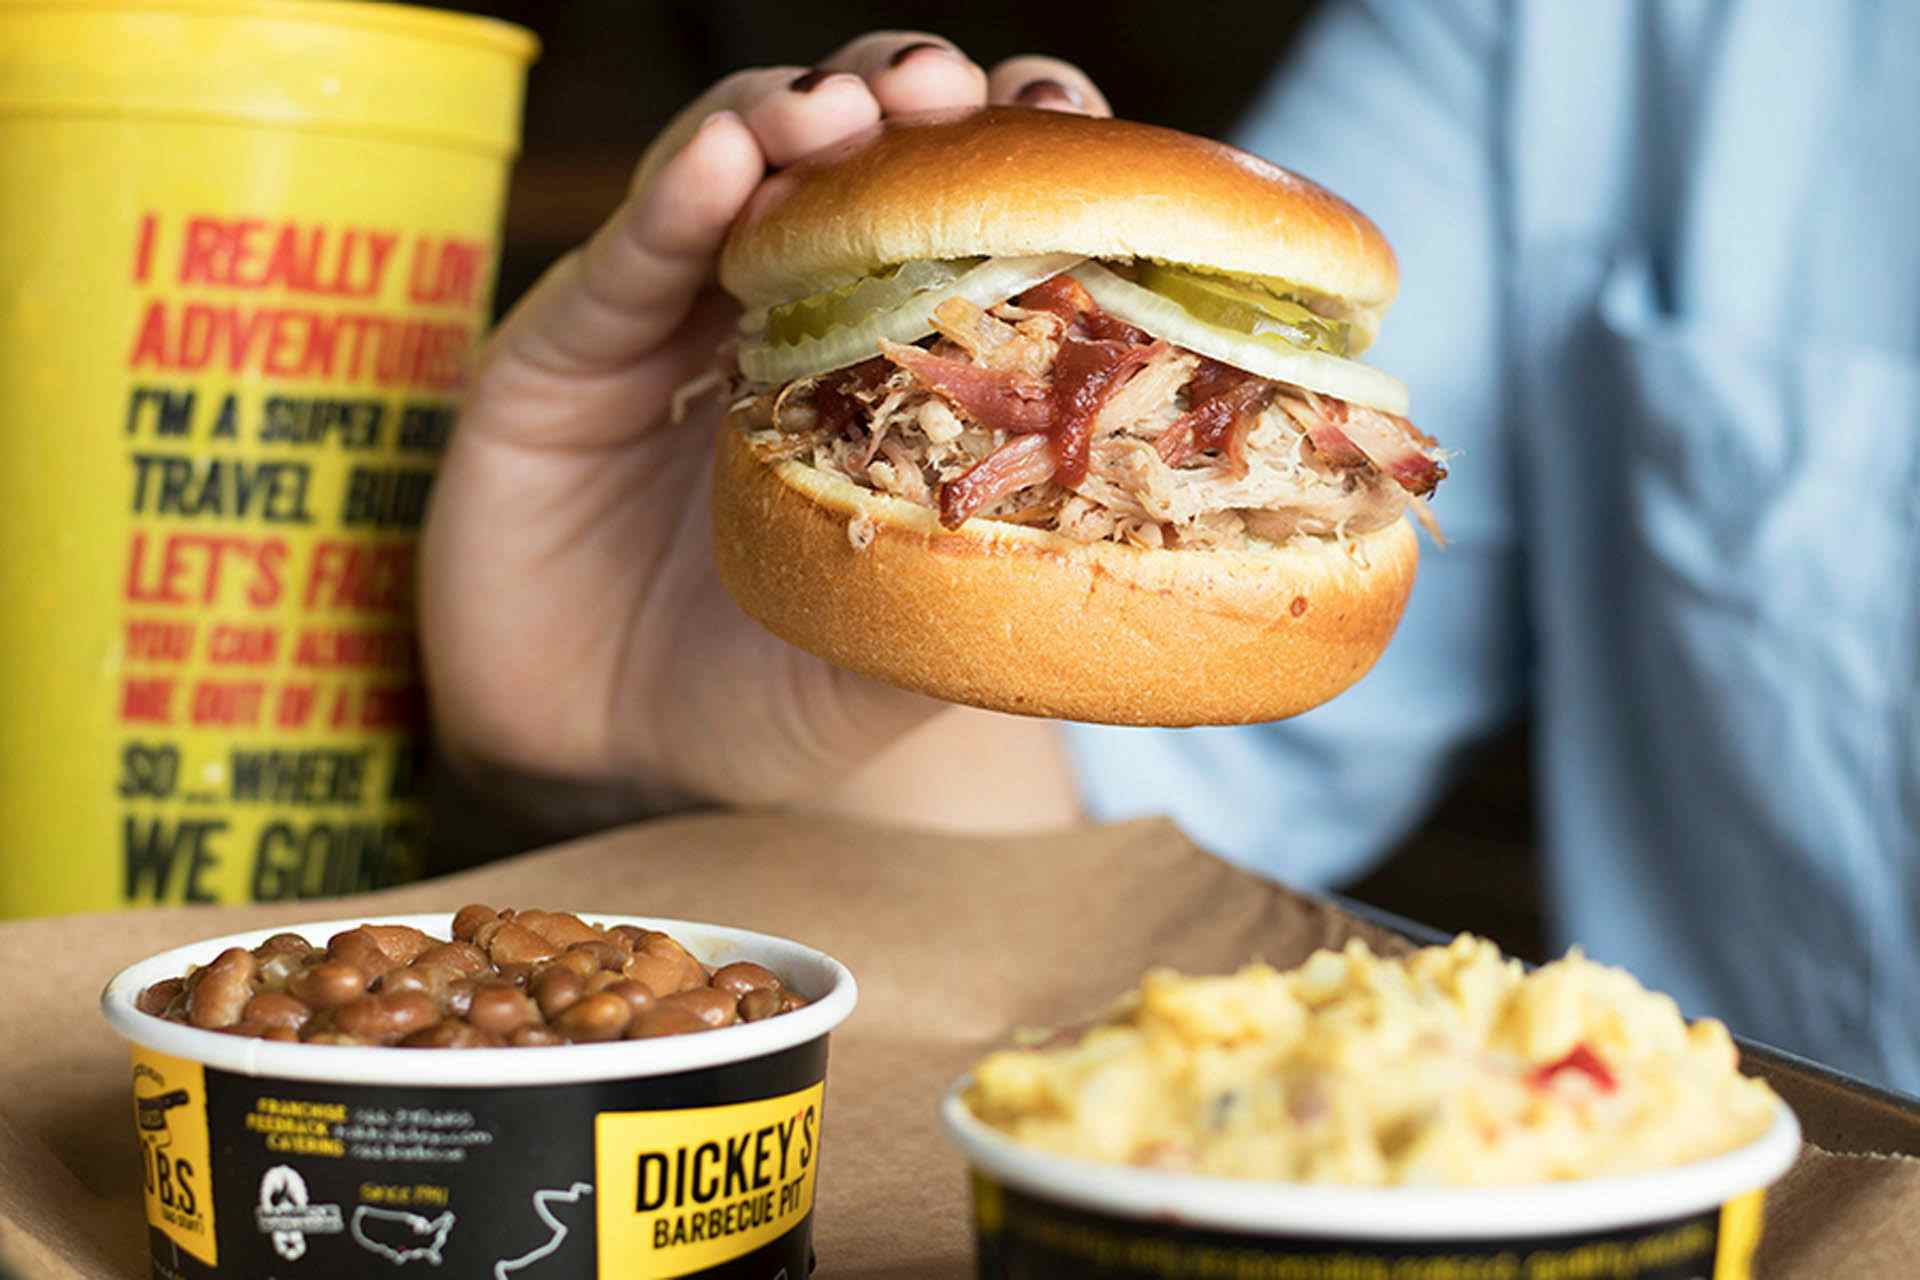 Franchising.com: Dickey’s Barbecue Pit: The Nation’s Catering Experts